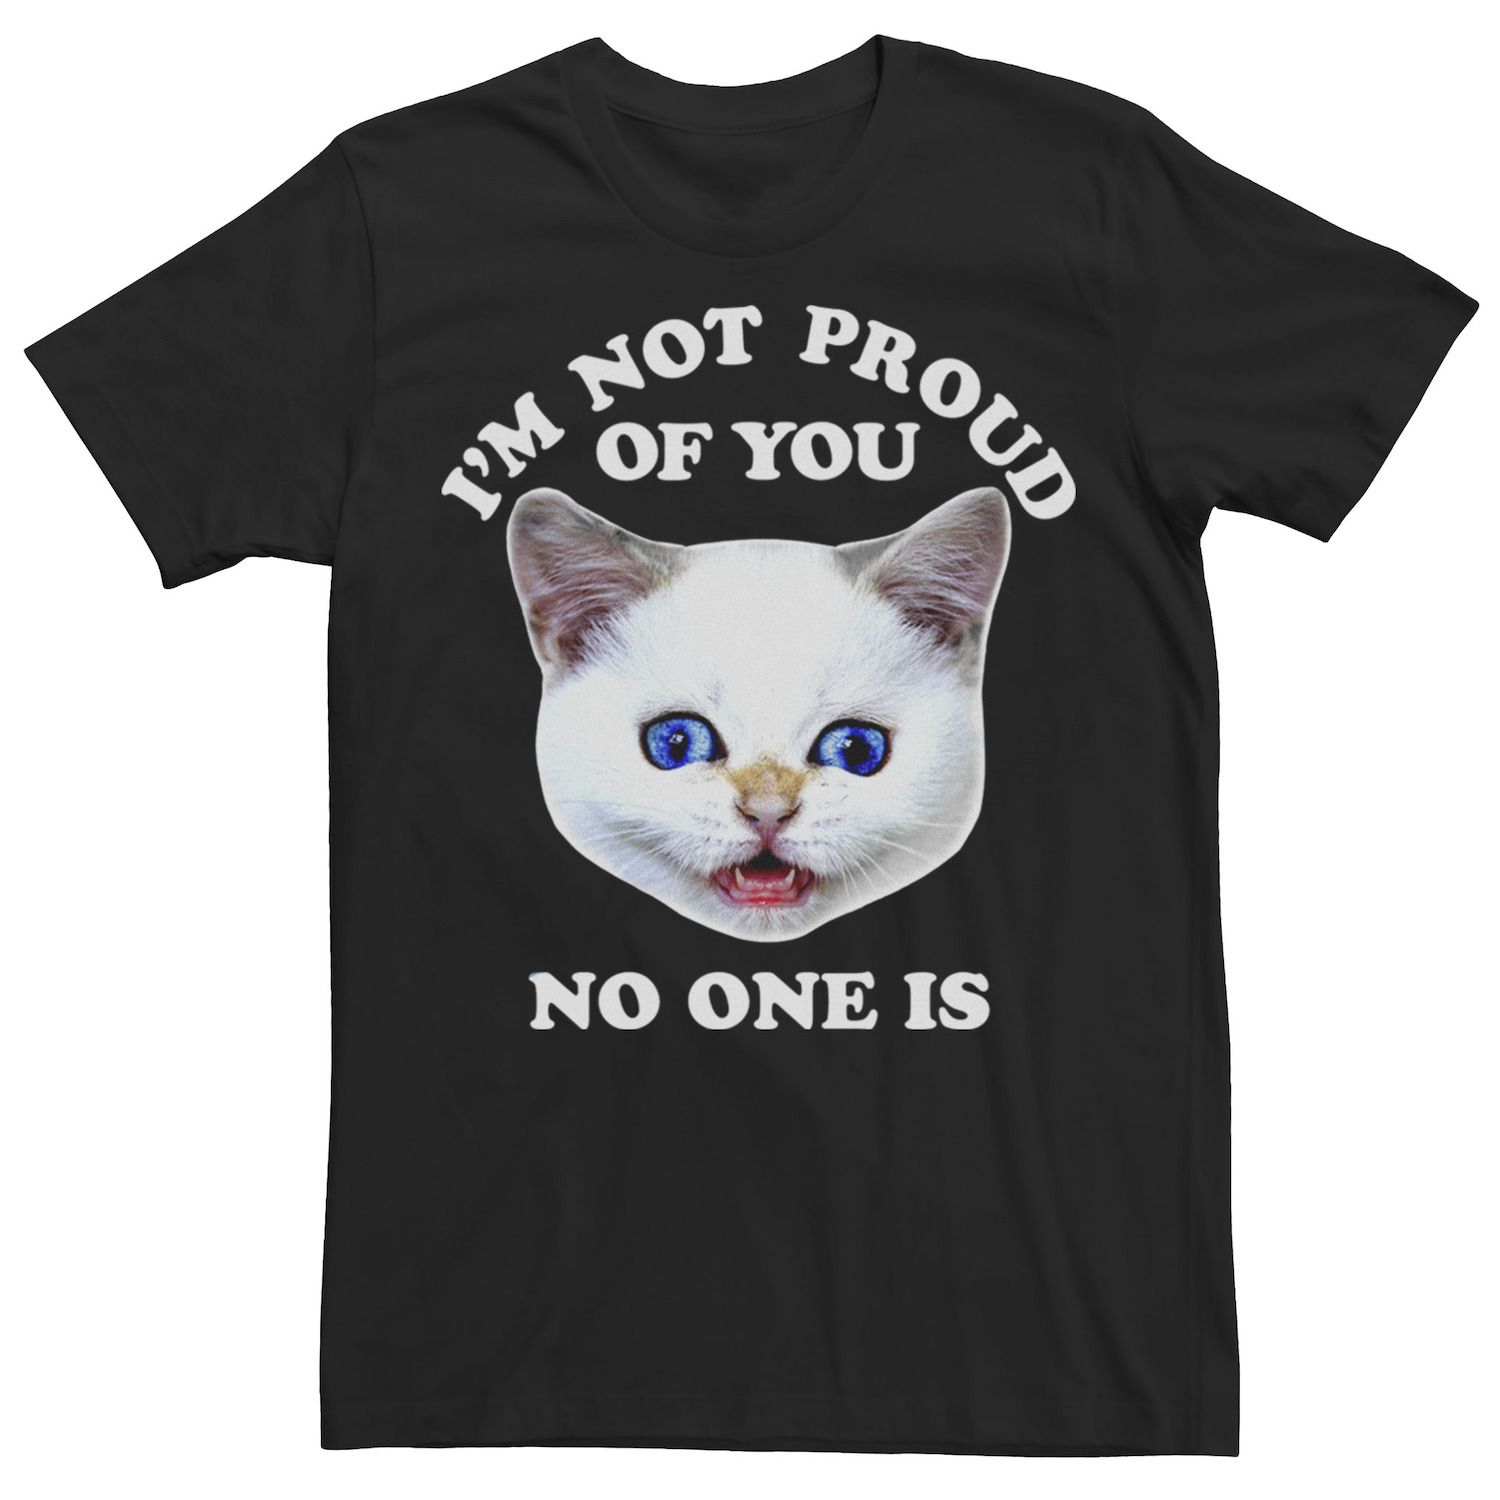 Image for Licensed Character Men's I'm Not Proud Of You Crossed Eyed Kitten Graphic Tee at Kohl's.